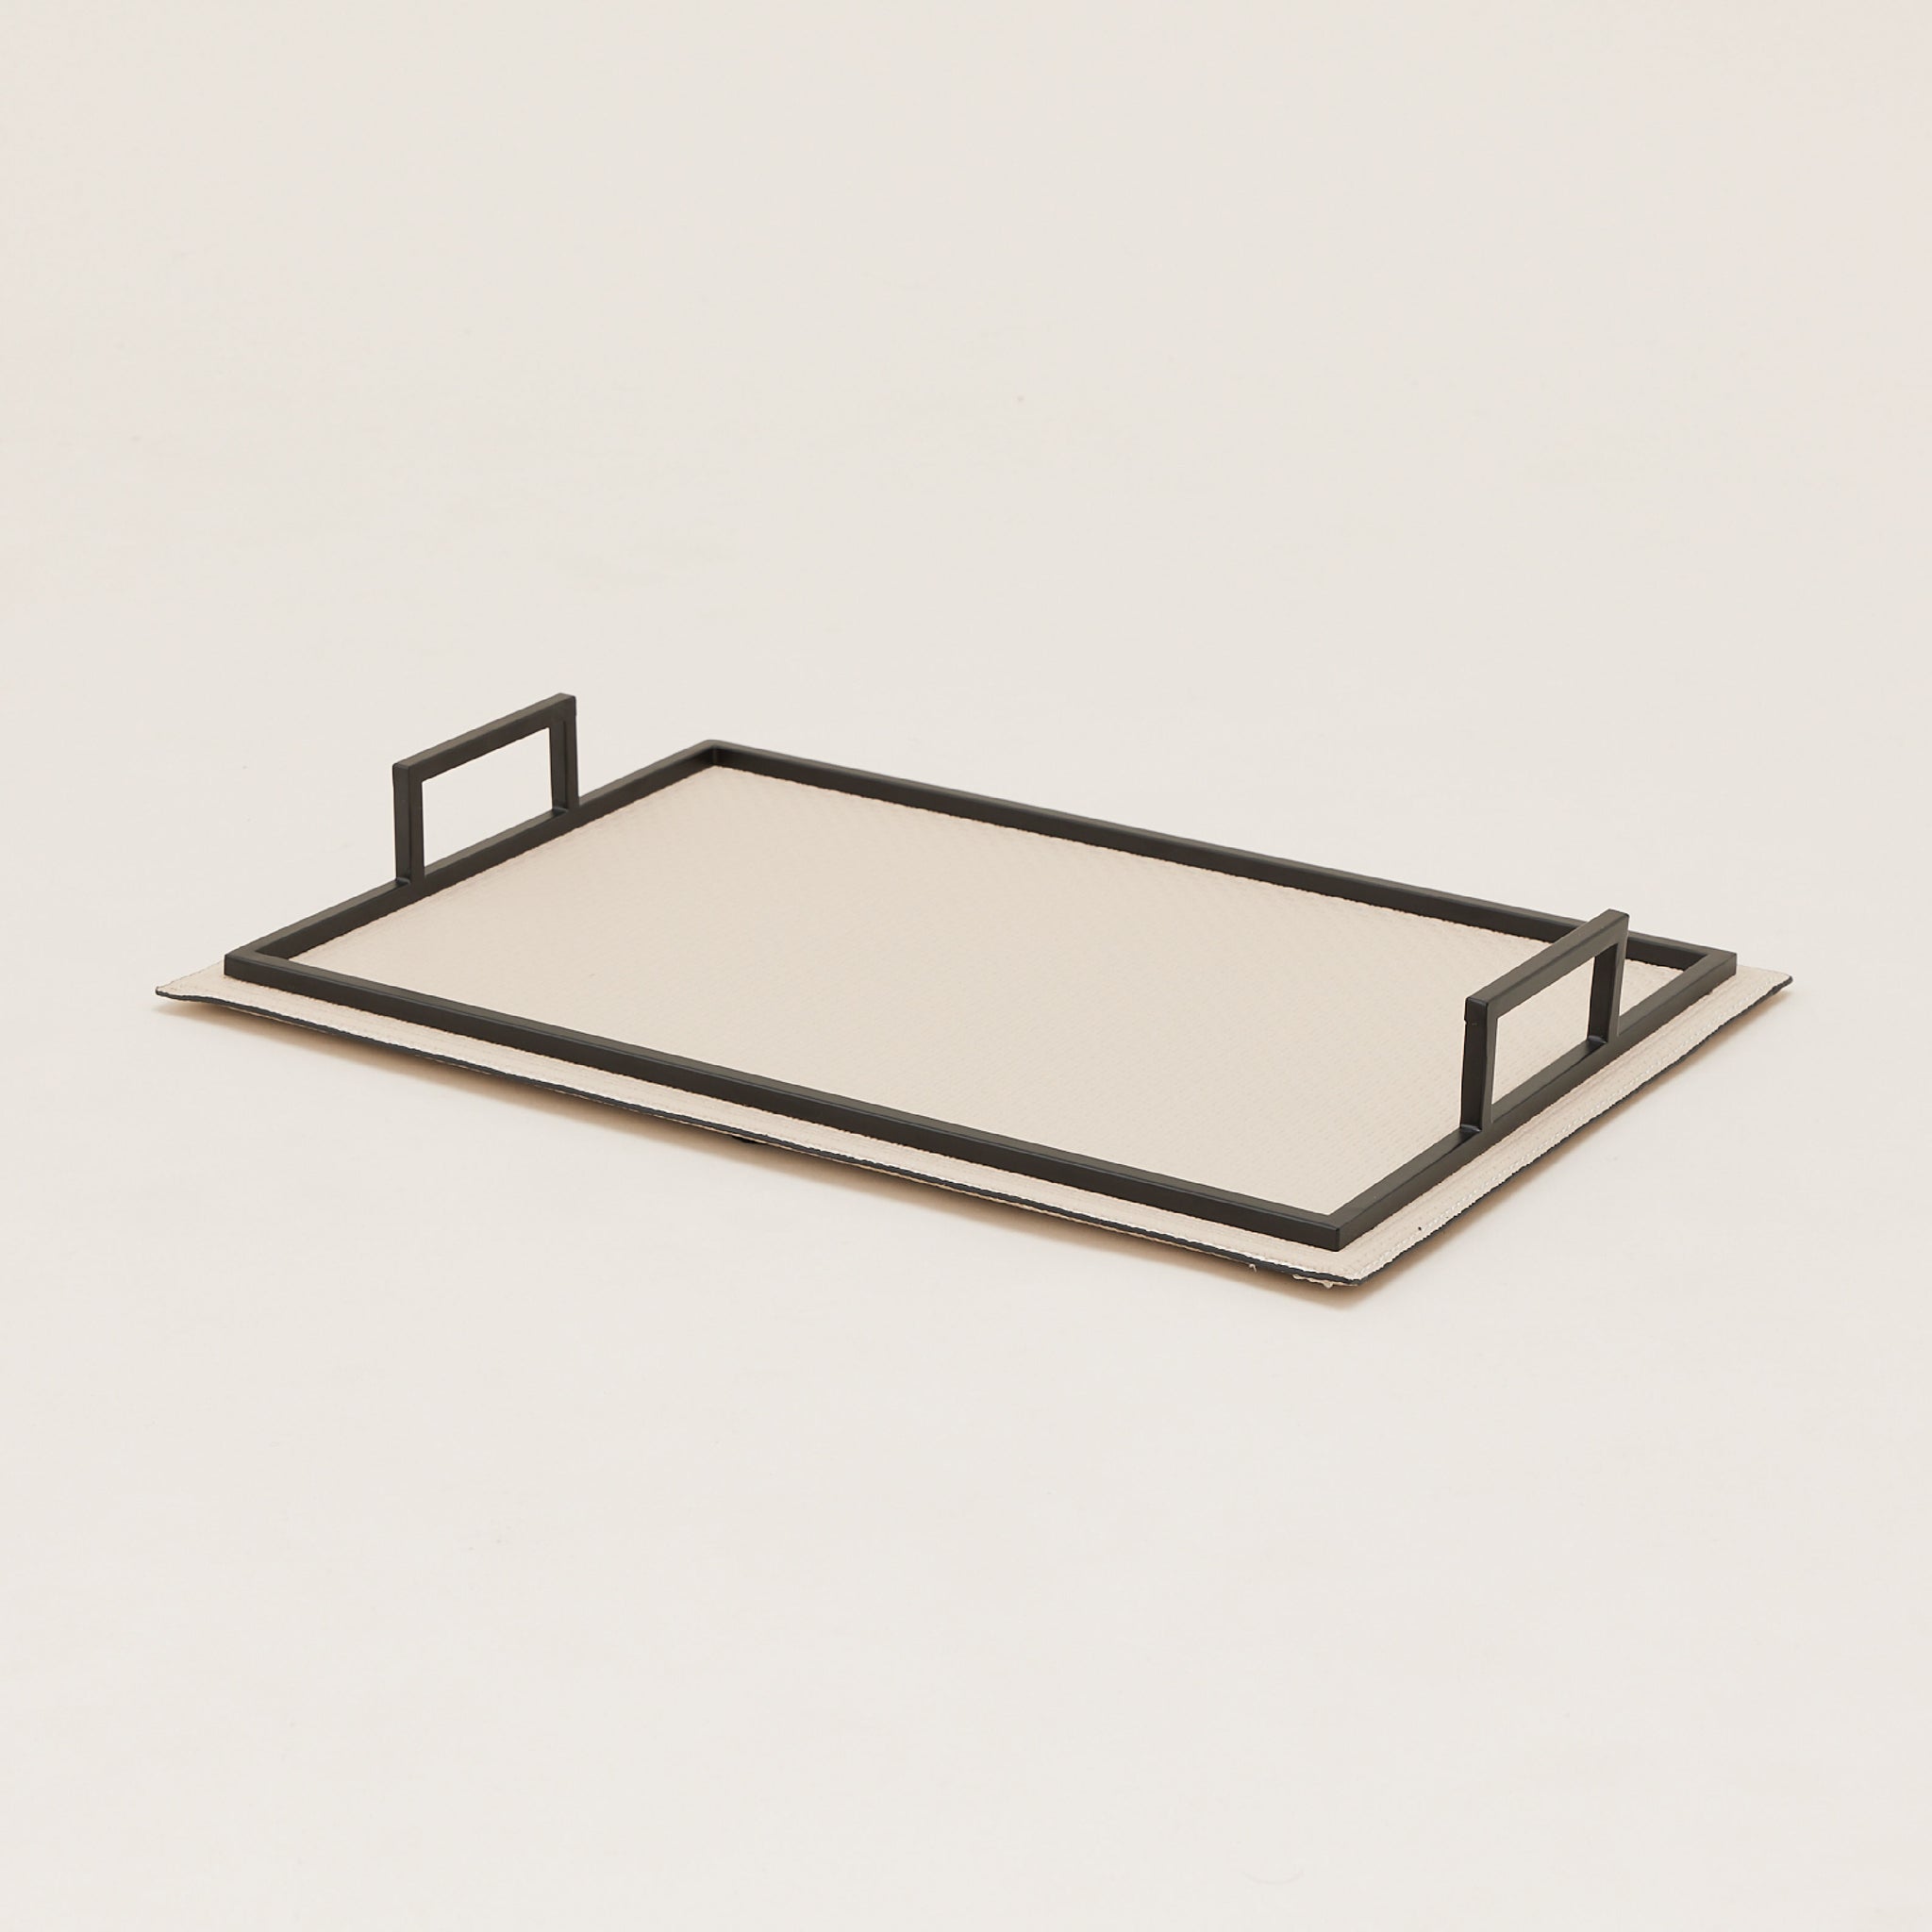 Large Leather Serving Tray | ที่วางของ